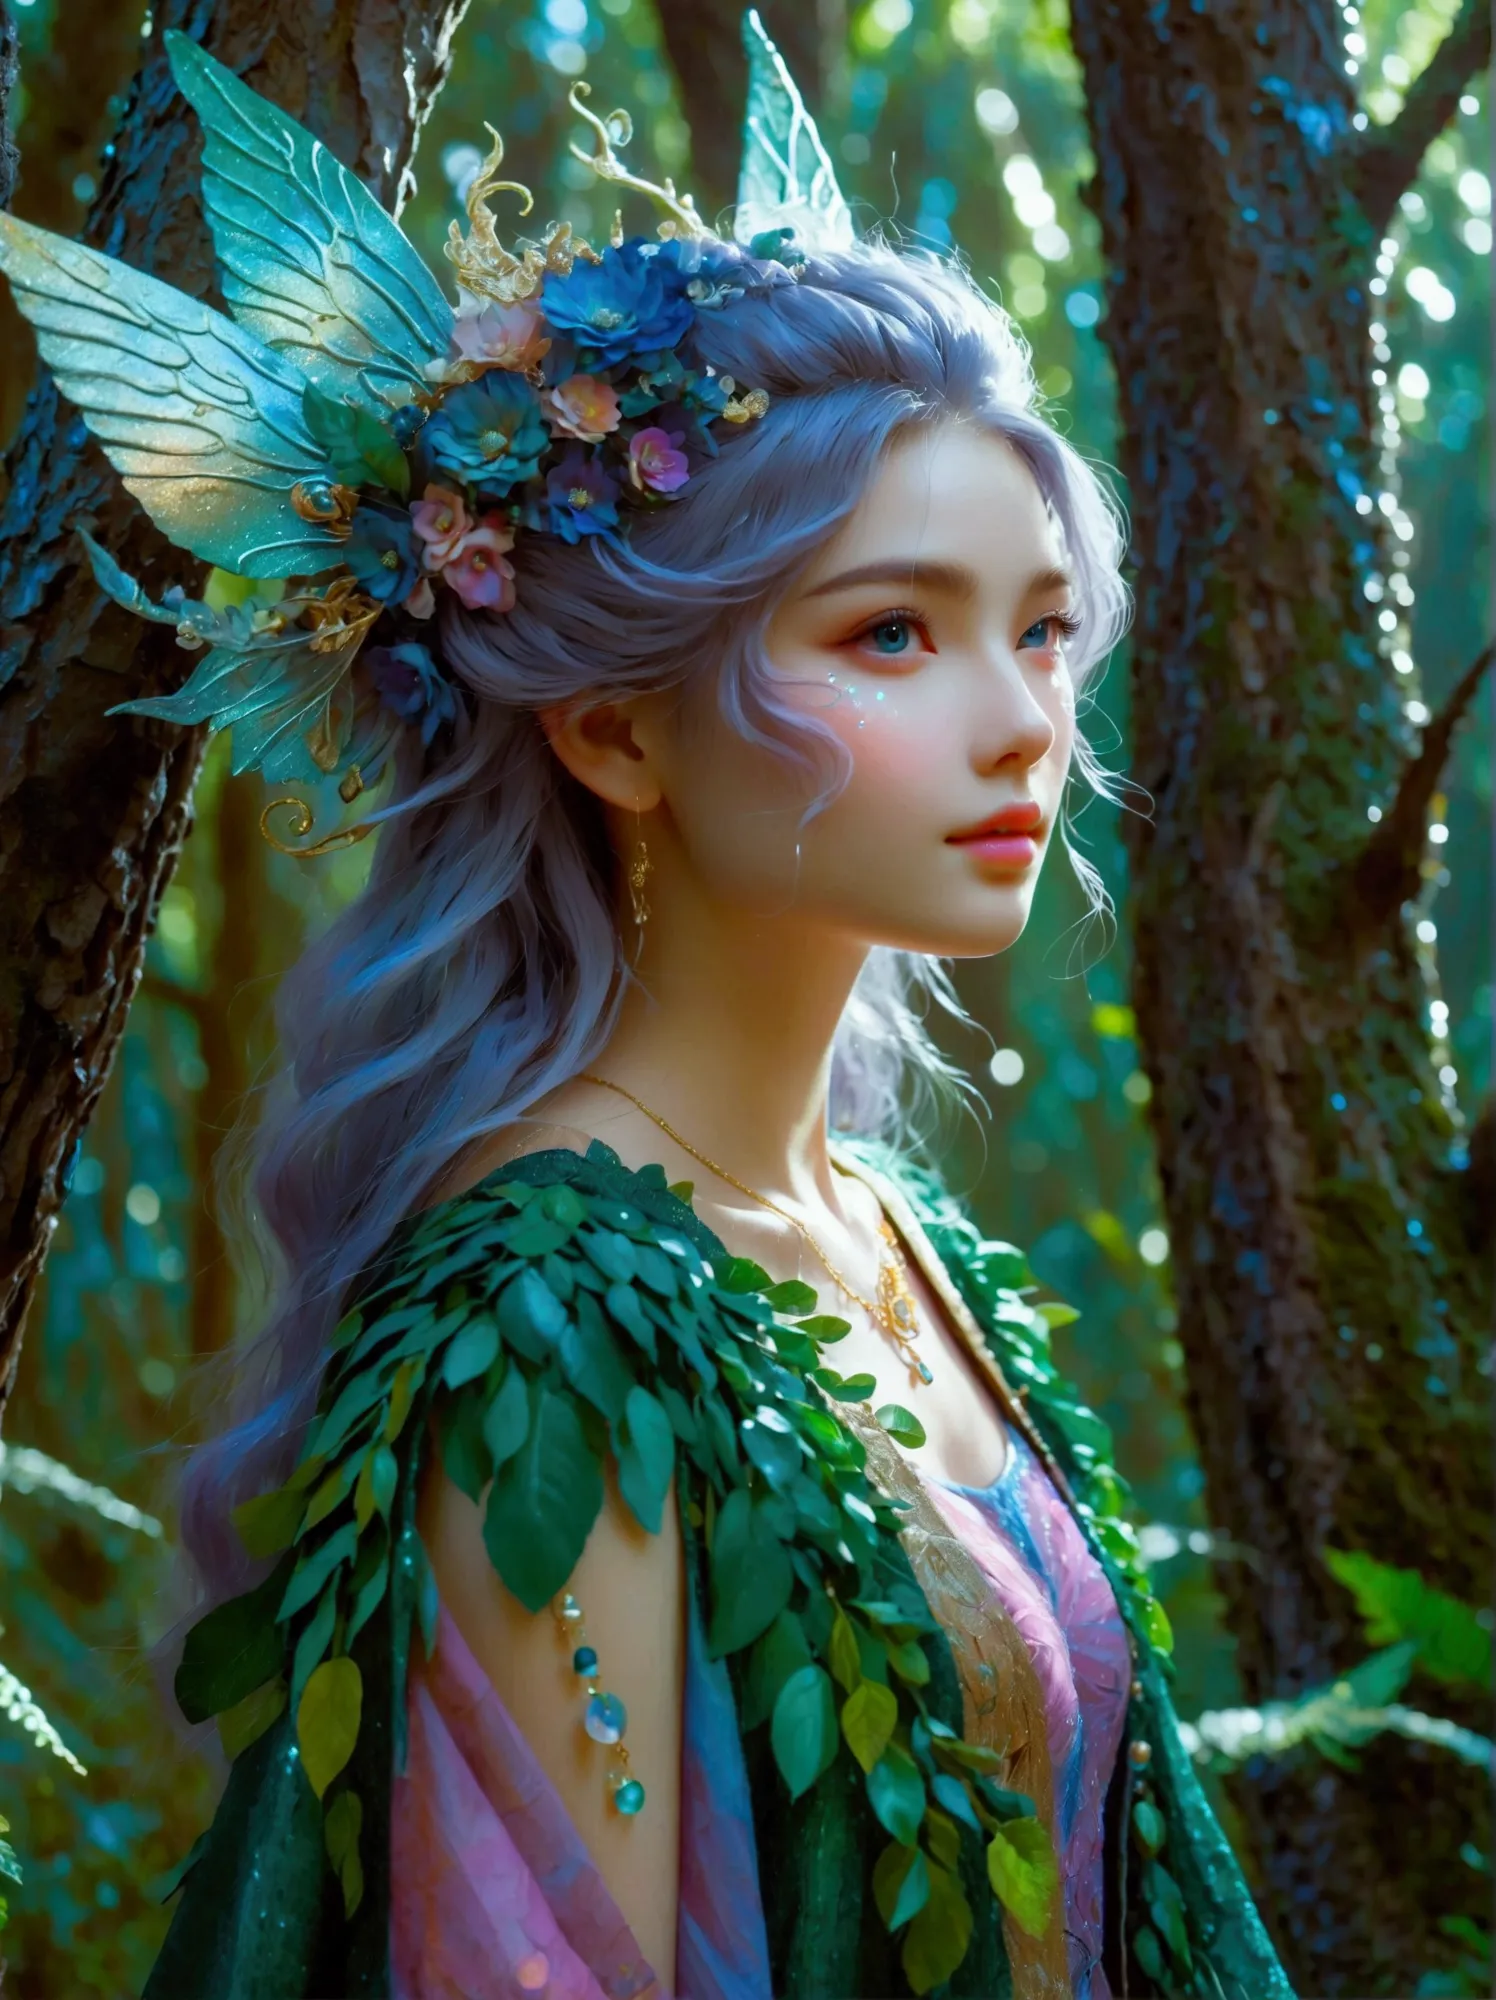 A fantastical creature with feminine qualities stands in a mystical forest. She has voluminous hair, captivating eyes, and adorn...